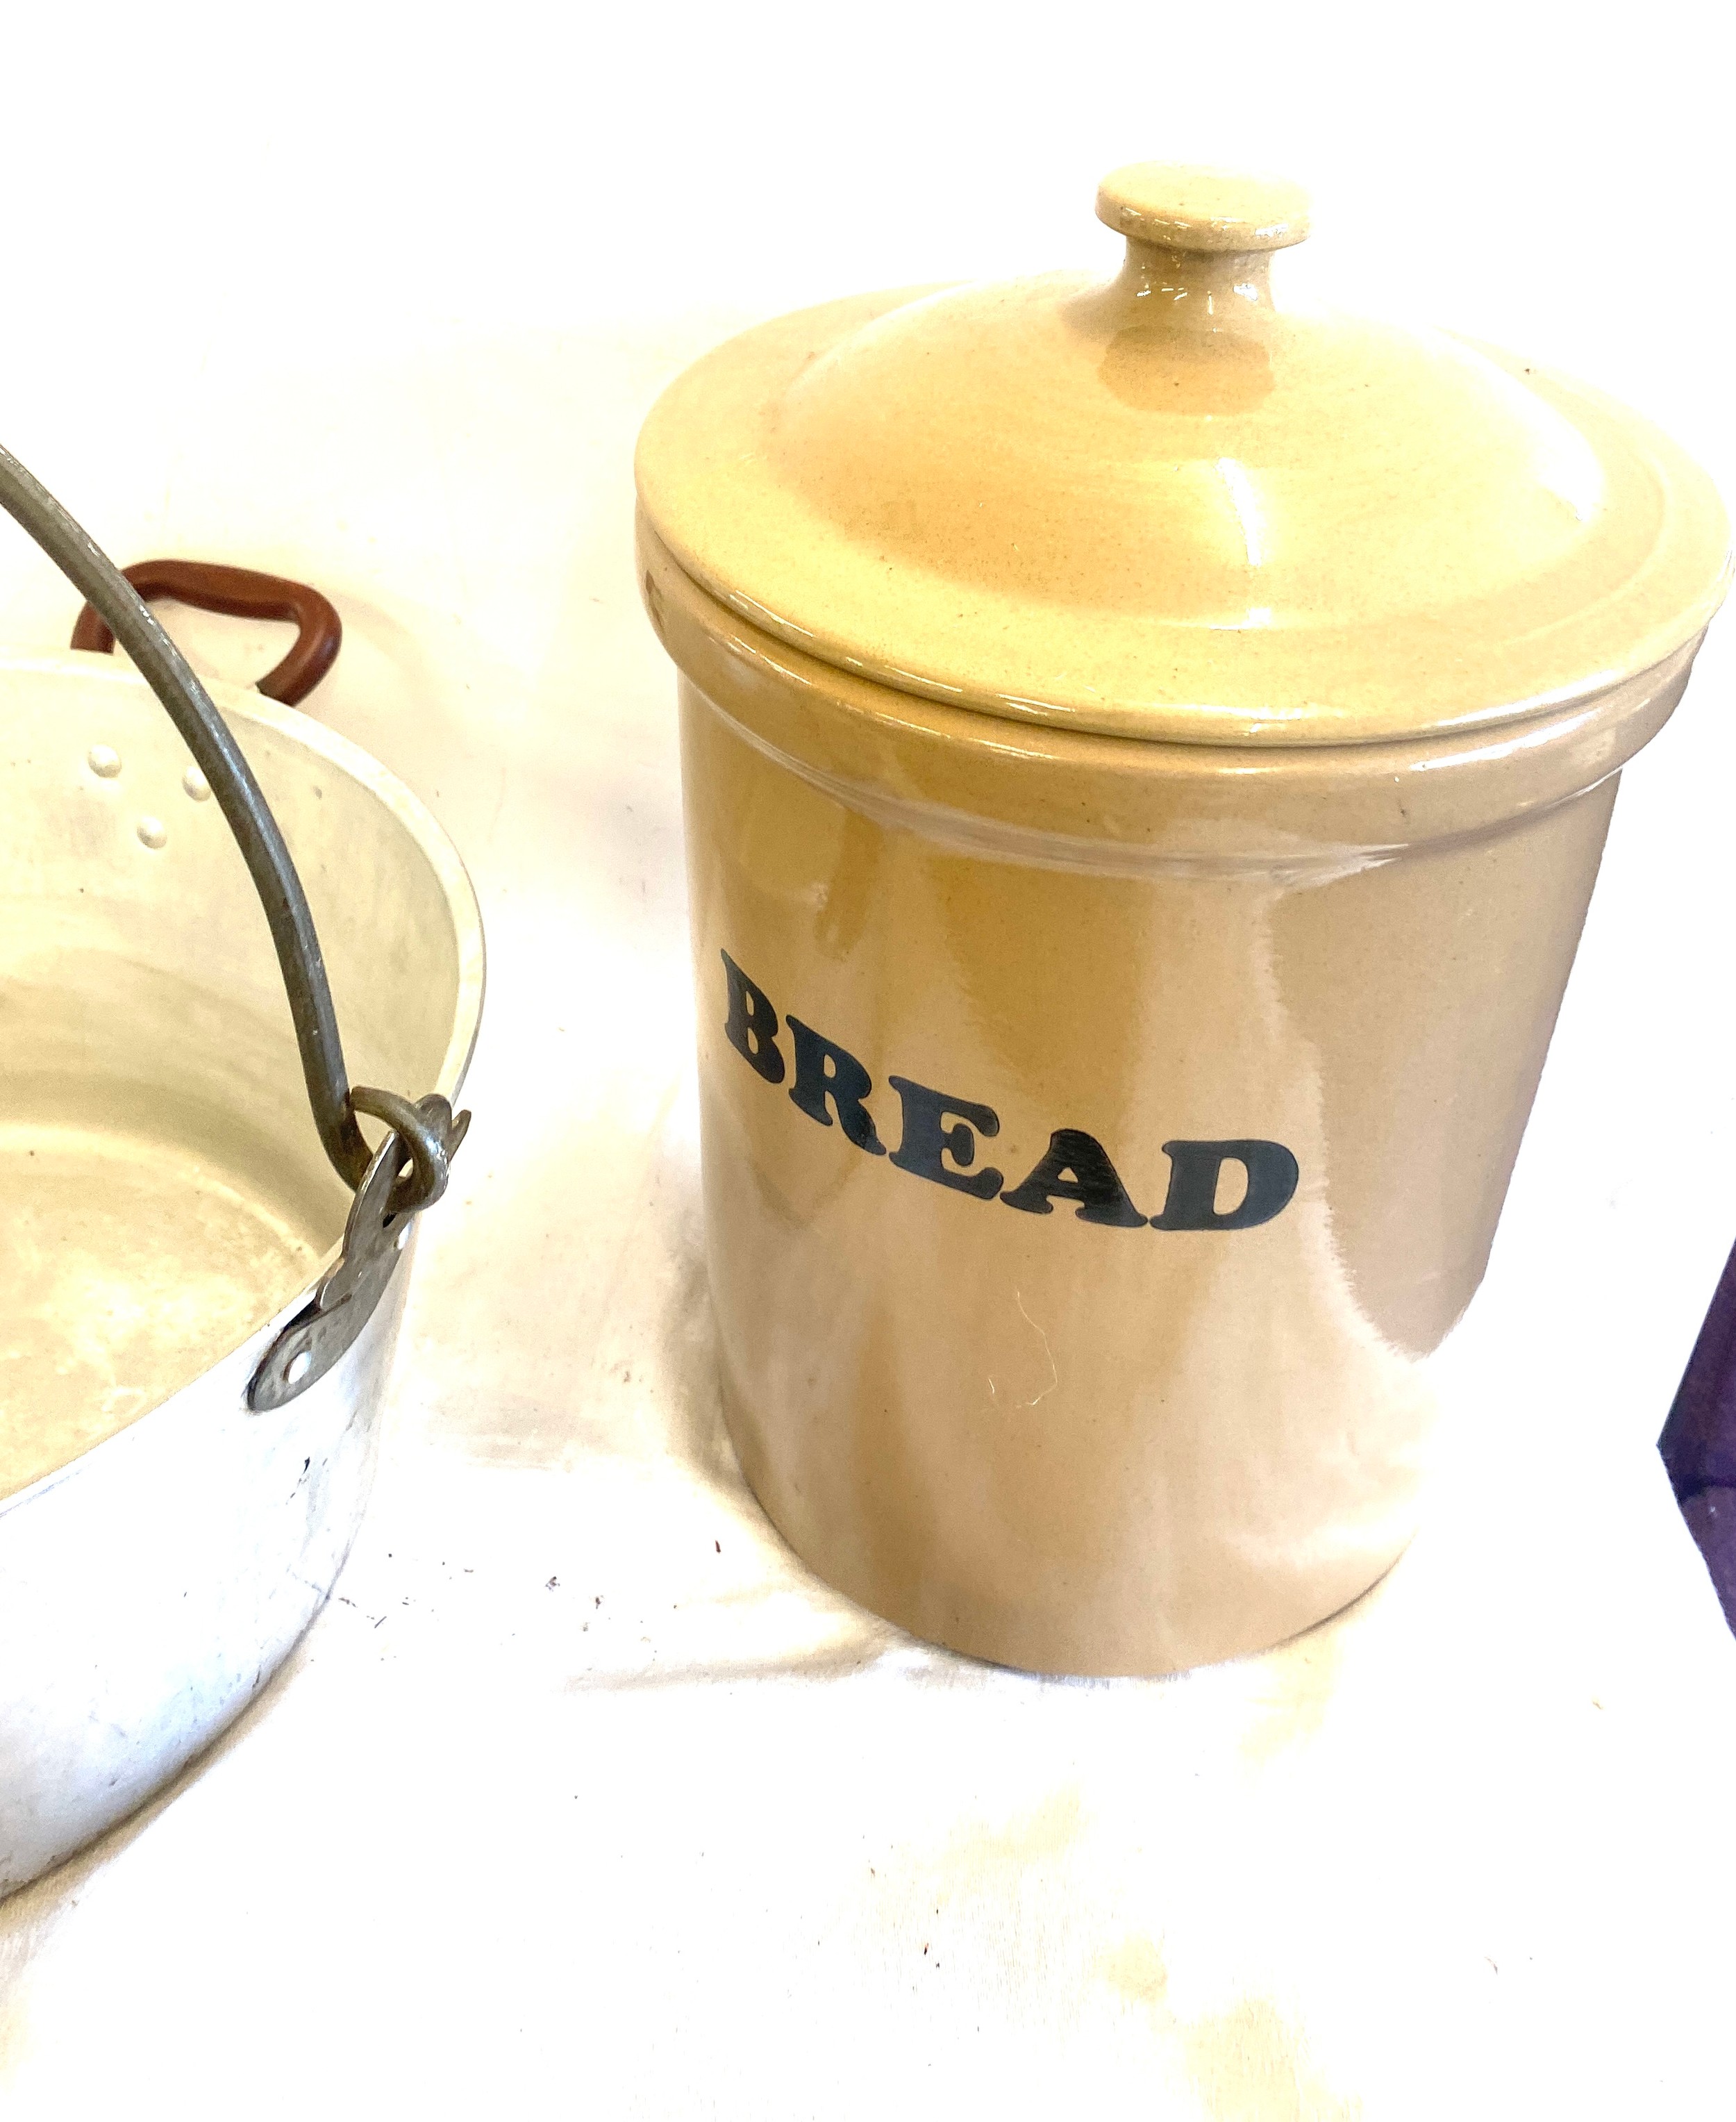 Stainless Steel jam pan, British made mincer, pottery bread bin - Image 5 of 5